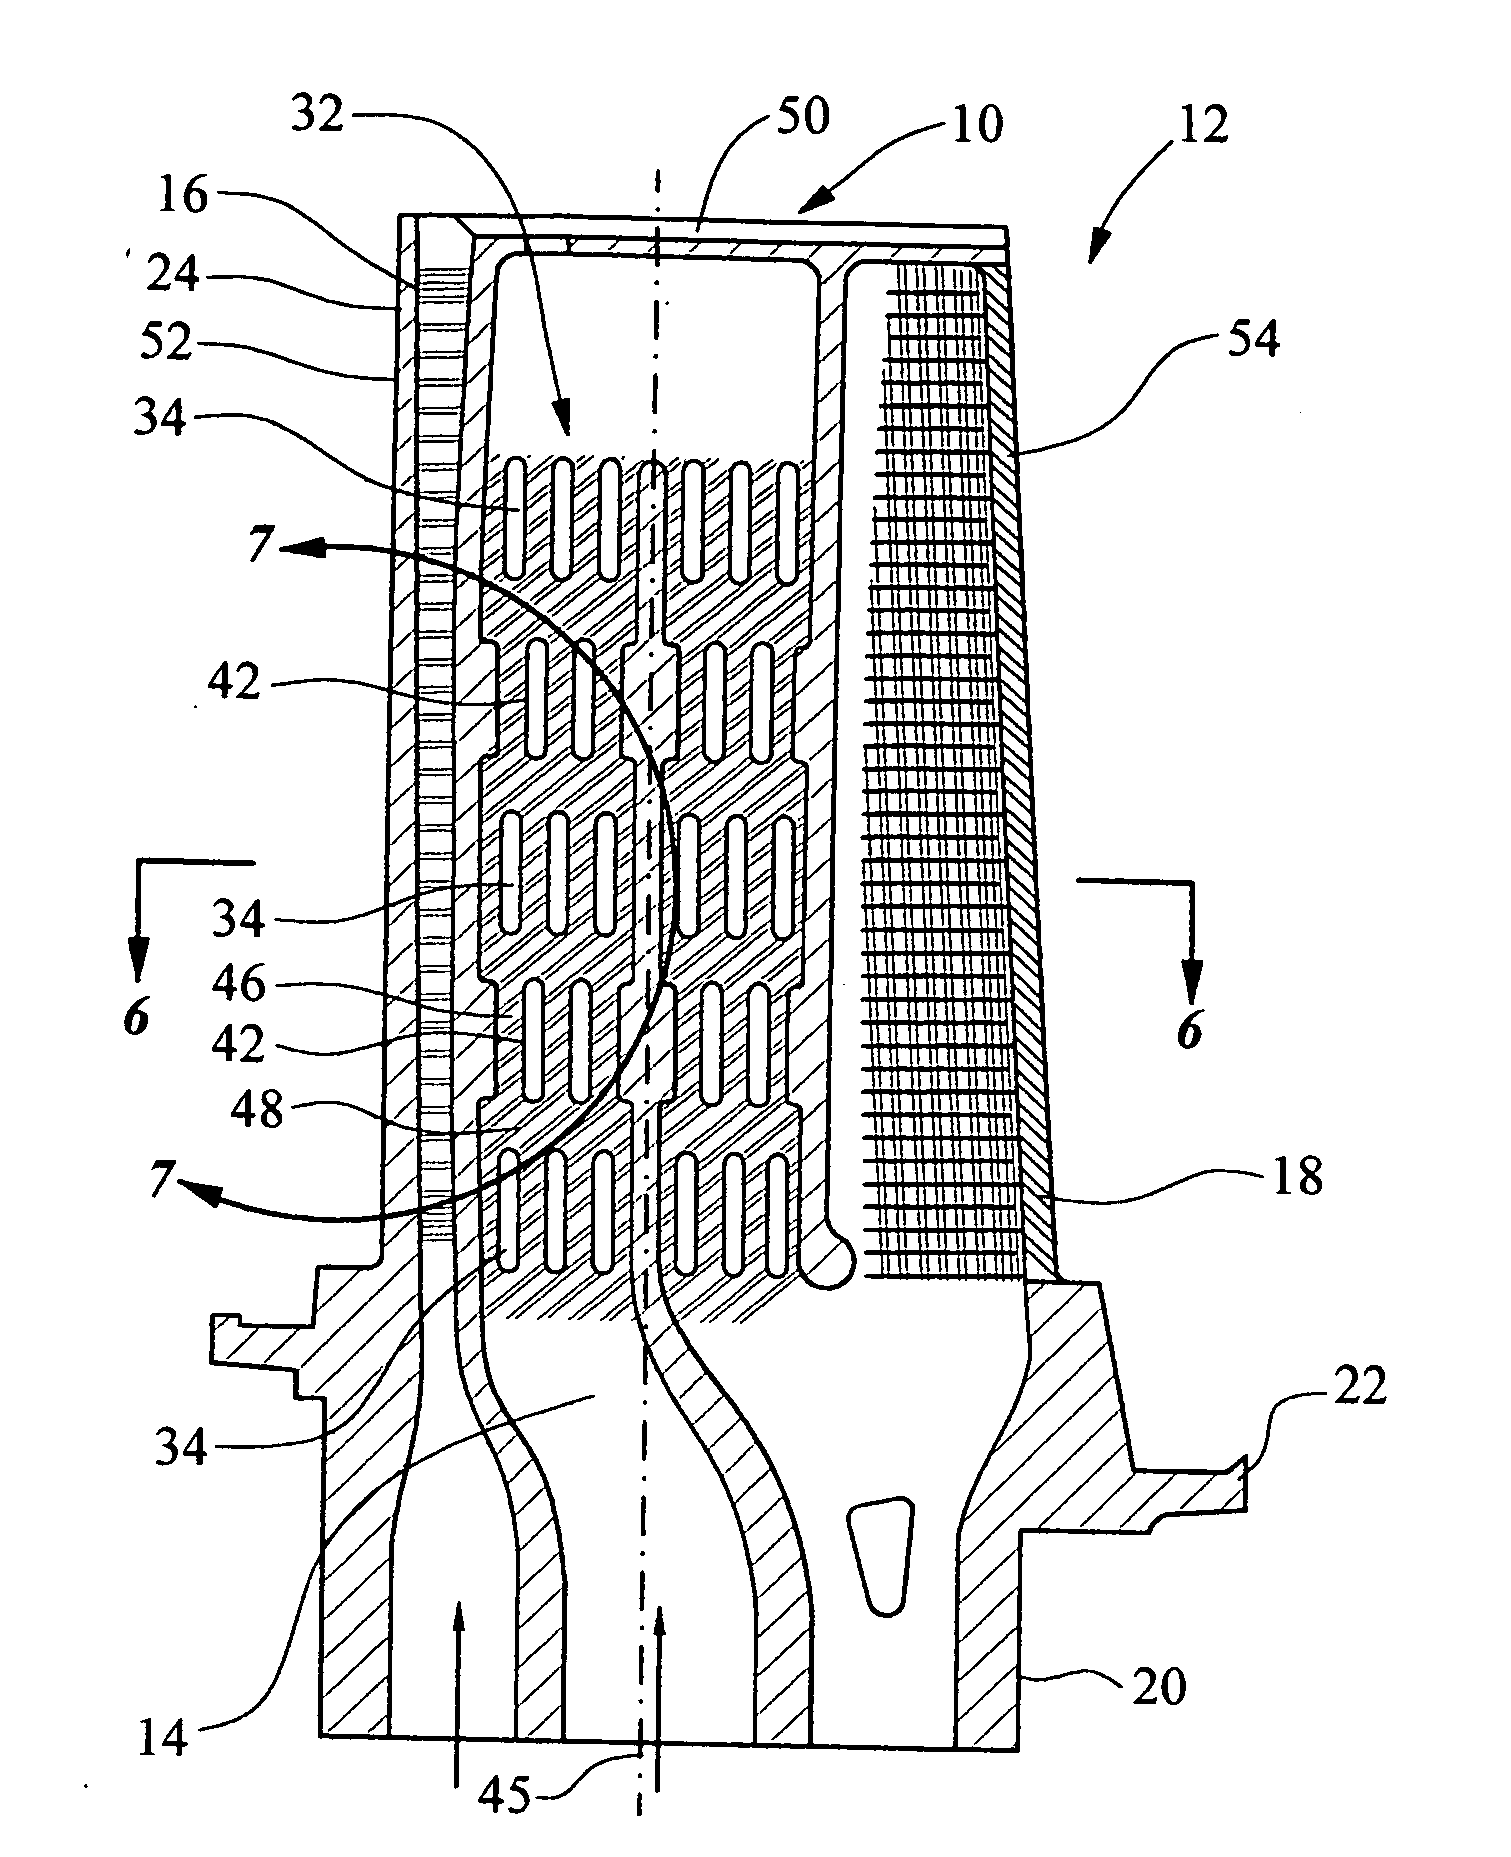 Cooling system including mini channels within a turbine blade of a turbine engine